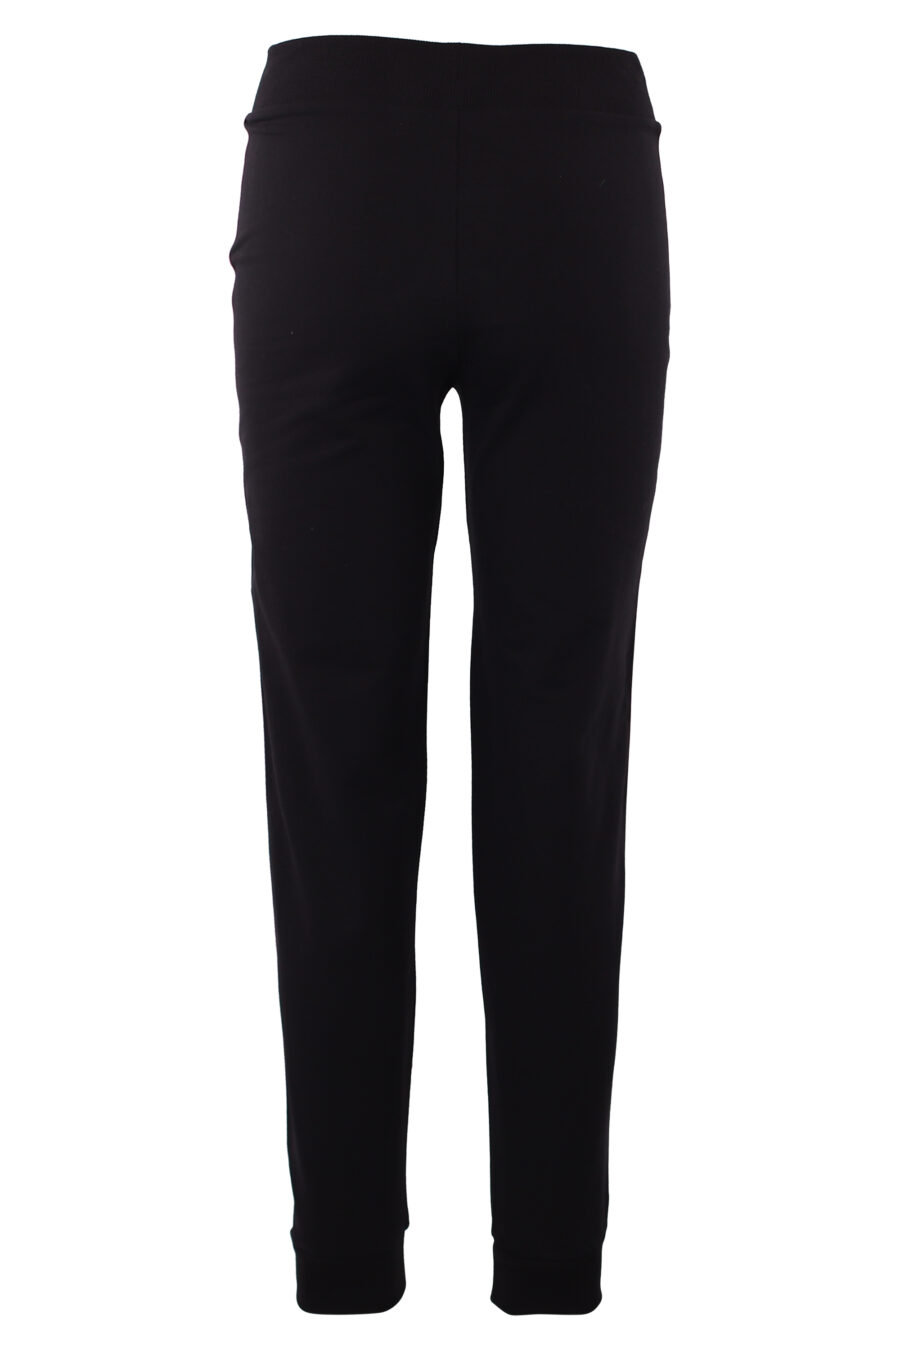 Tracksuit bottoms black with side band logo and black logo - IMG 6282